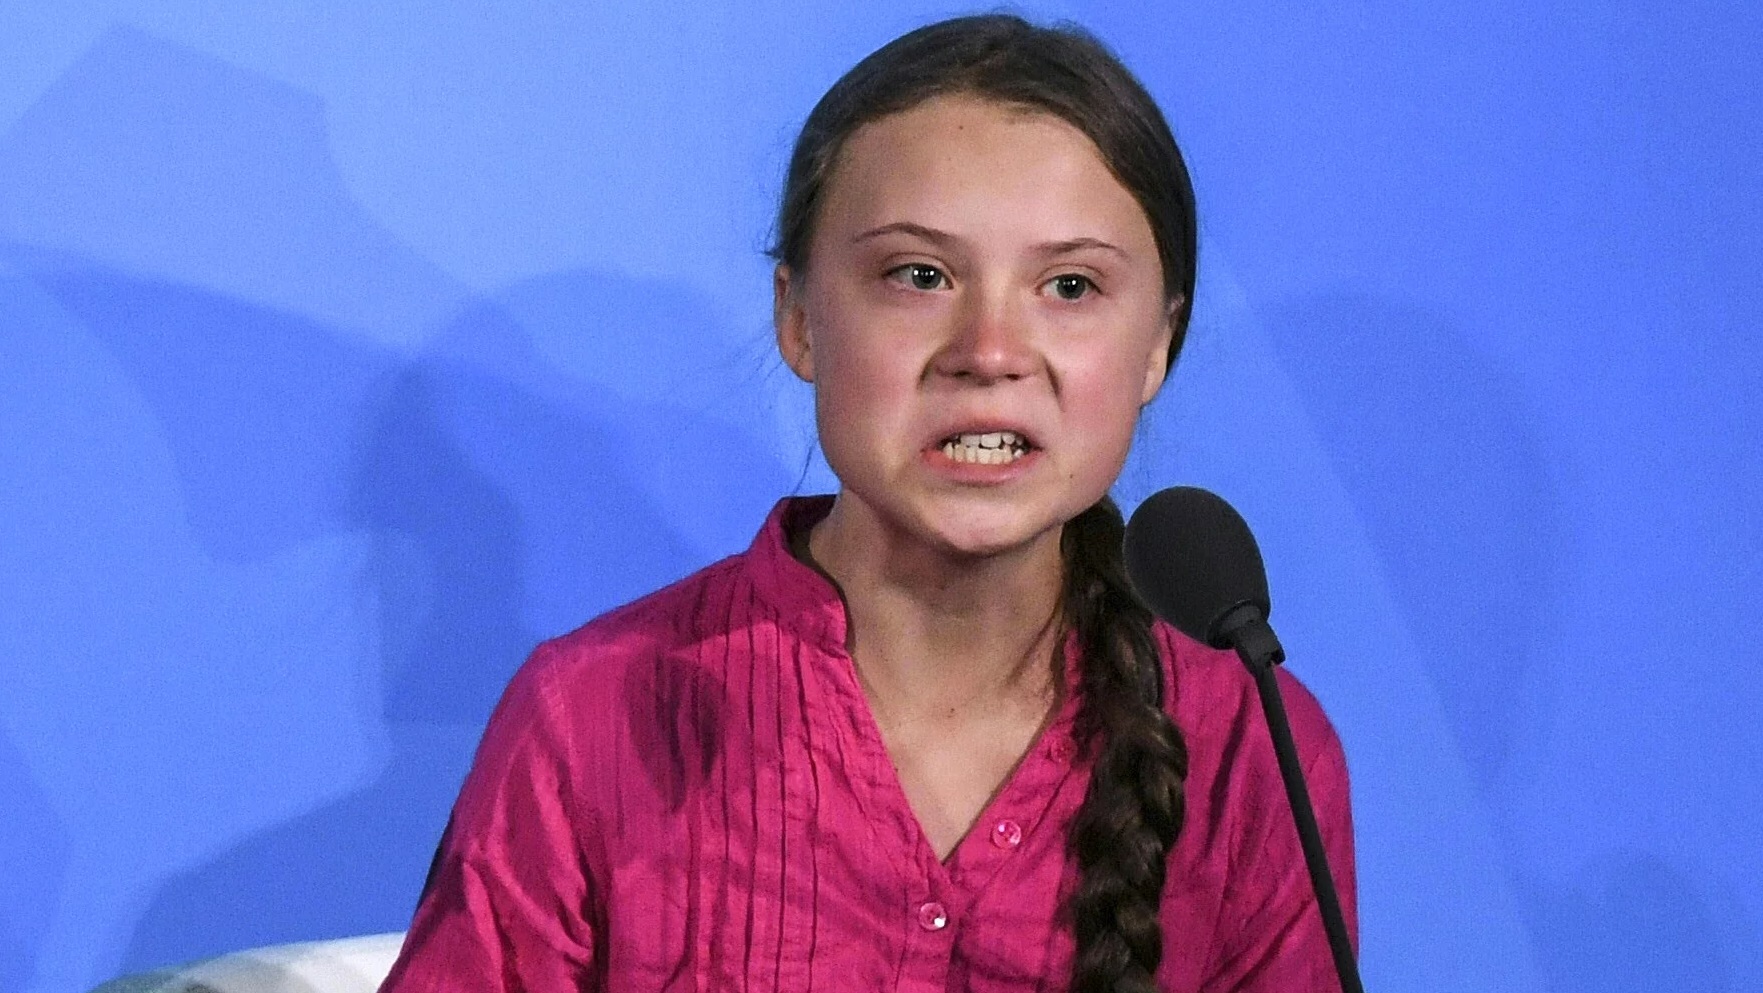 Image: MUST READ: Greta Thunberg pushed to prominence by ANTIFA parents and Soros connections